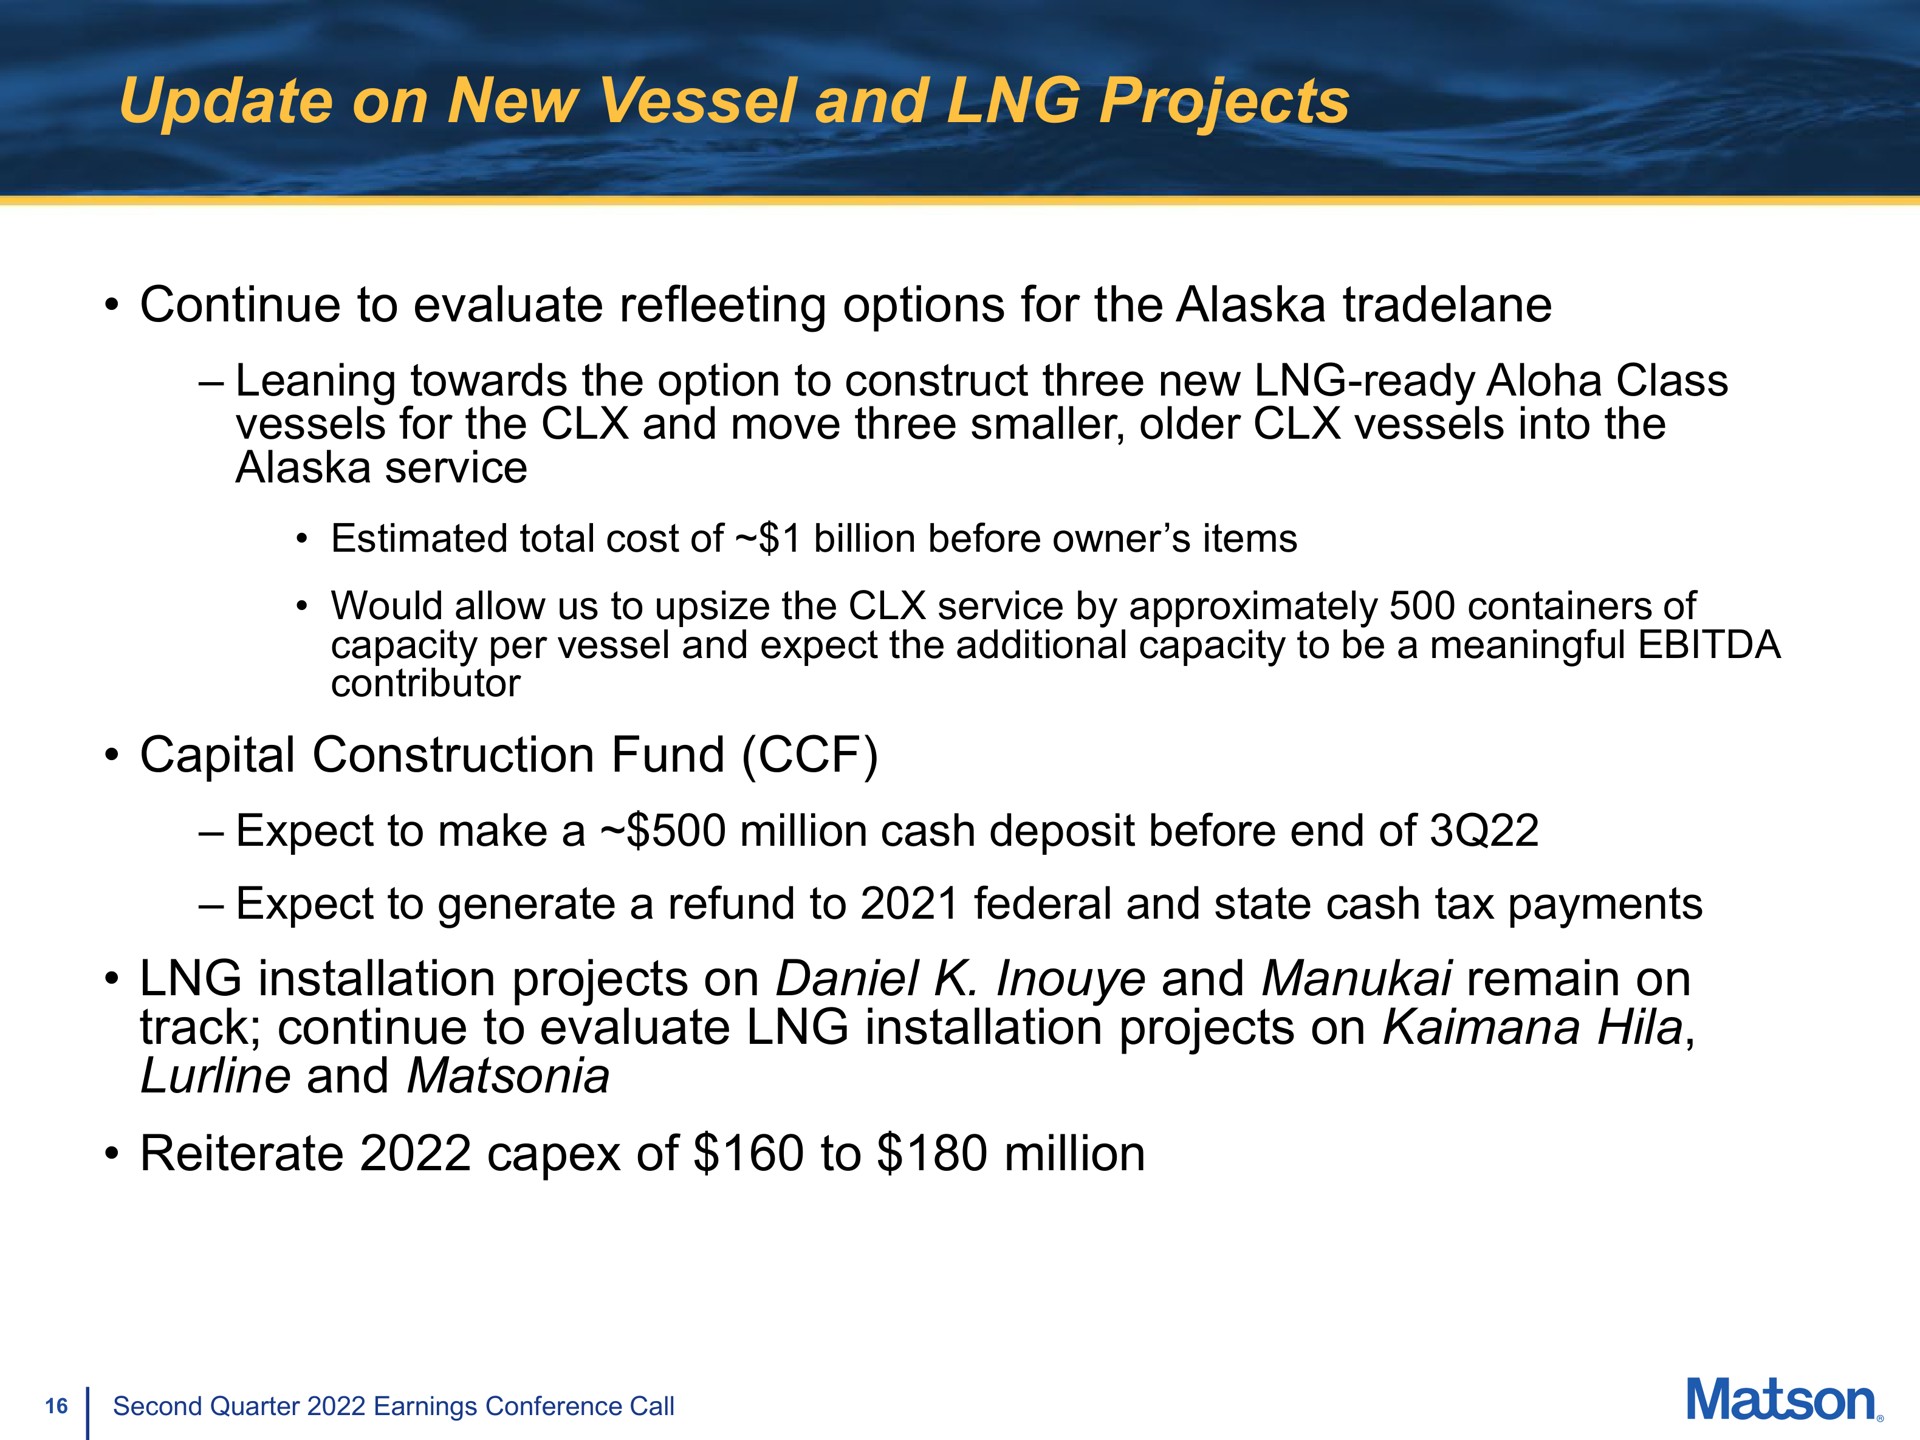 update on new vessel and projects continue to evaluate options for the leaning towards the option to construct three new ready class vessels for the and move three smaller older vessels into the service capital construction fund expect to make a million cash deposit before end of expect to generate a refund to federal and state cash tax payments installation projects on and remain on track continue to evaluate installation projects on hila and reiterate of to million | Matson